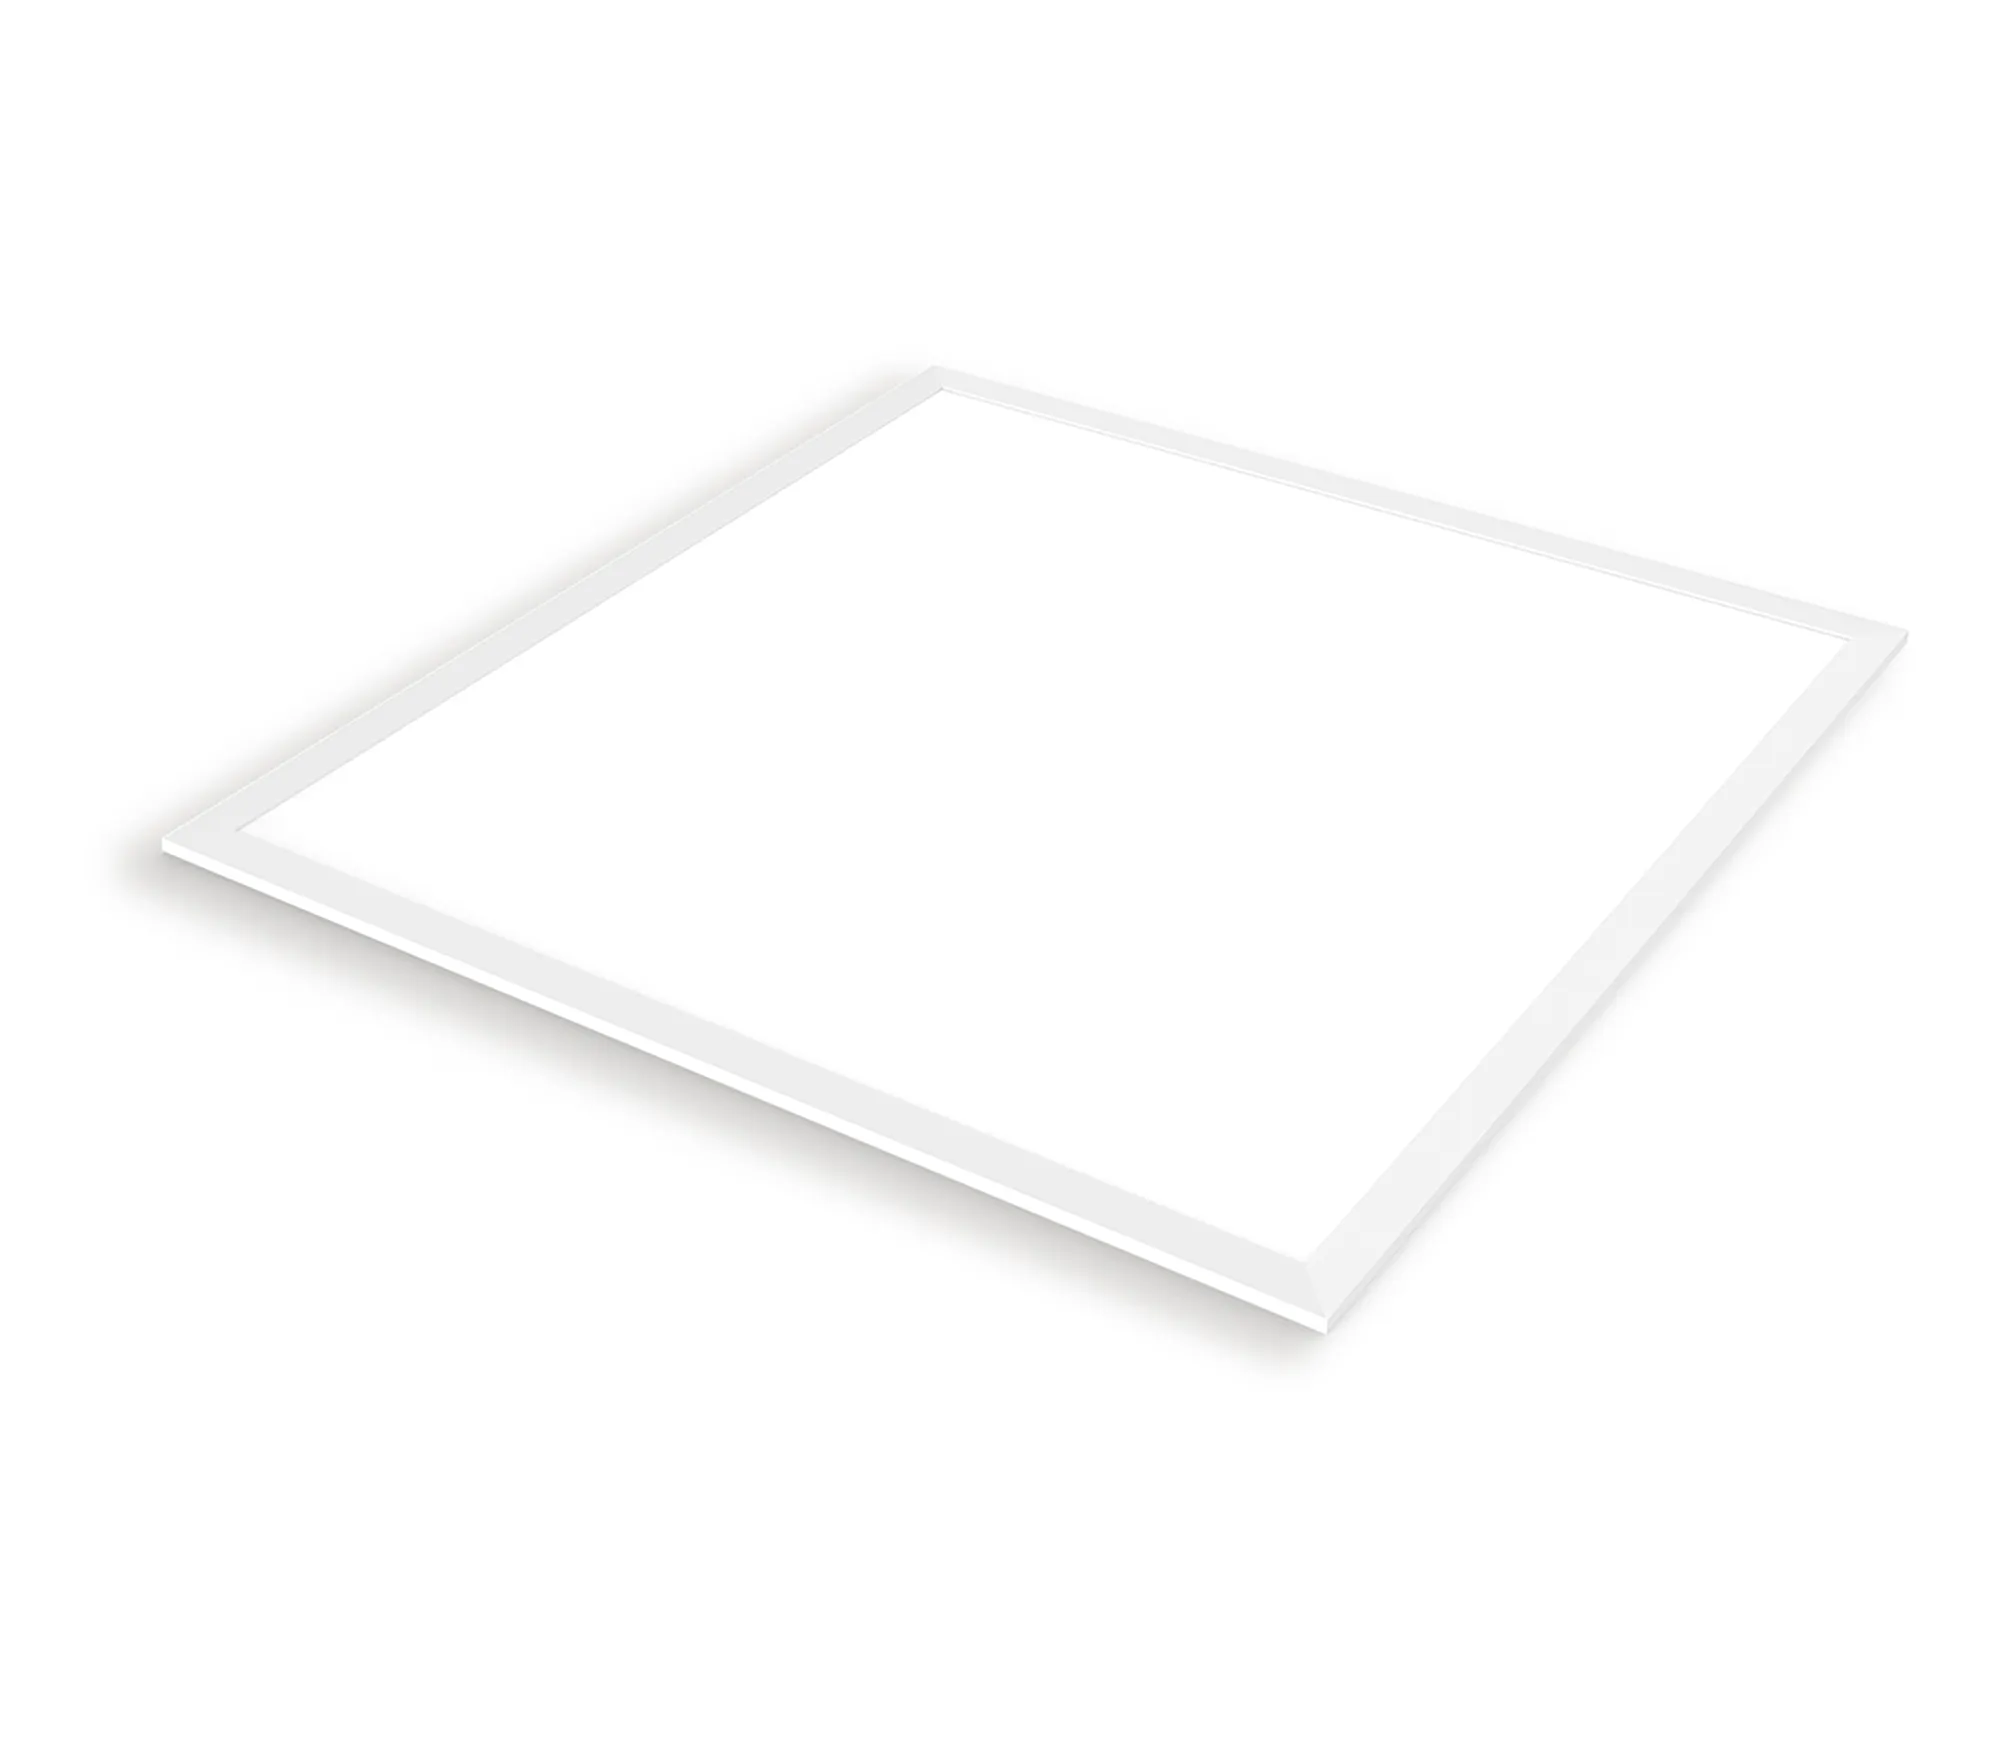 Panel X2 Supervision Recessed Ceiling Luminaires Techtouch Square/Rectangular Recess Ceiling